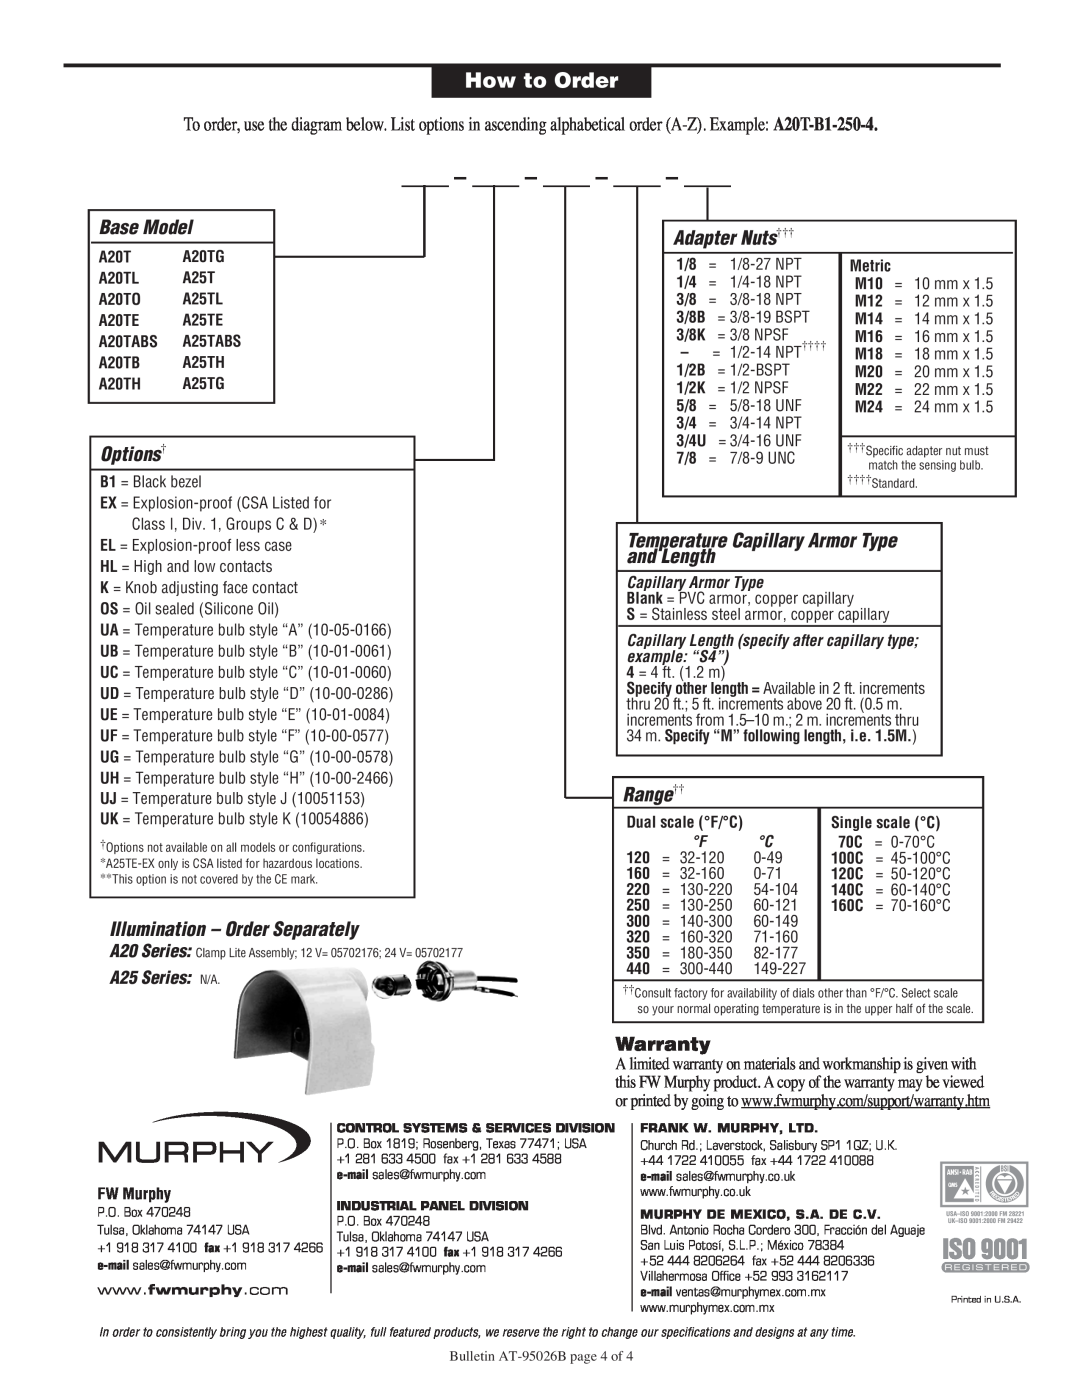 Murphy How to Order, Warranty, A25 Series N/A, Base Model, Options†, Illumination - Order Separately, Adapter Nuts††† 